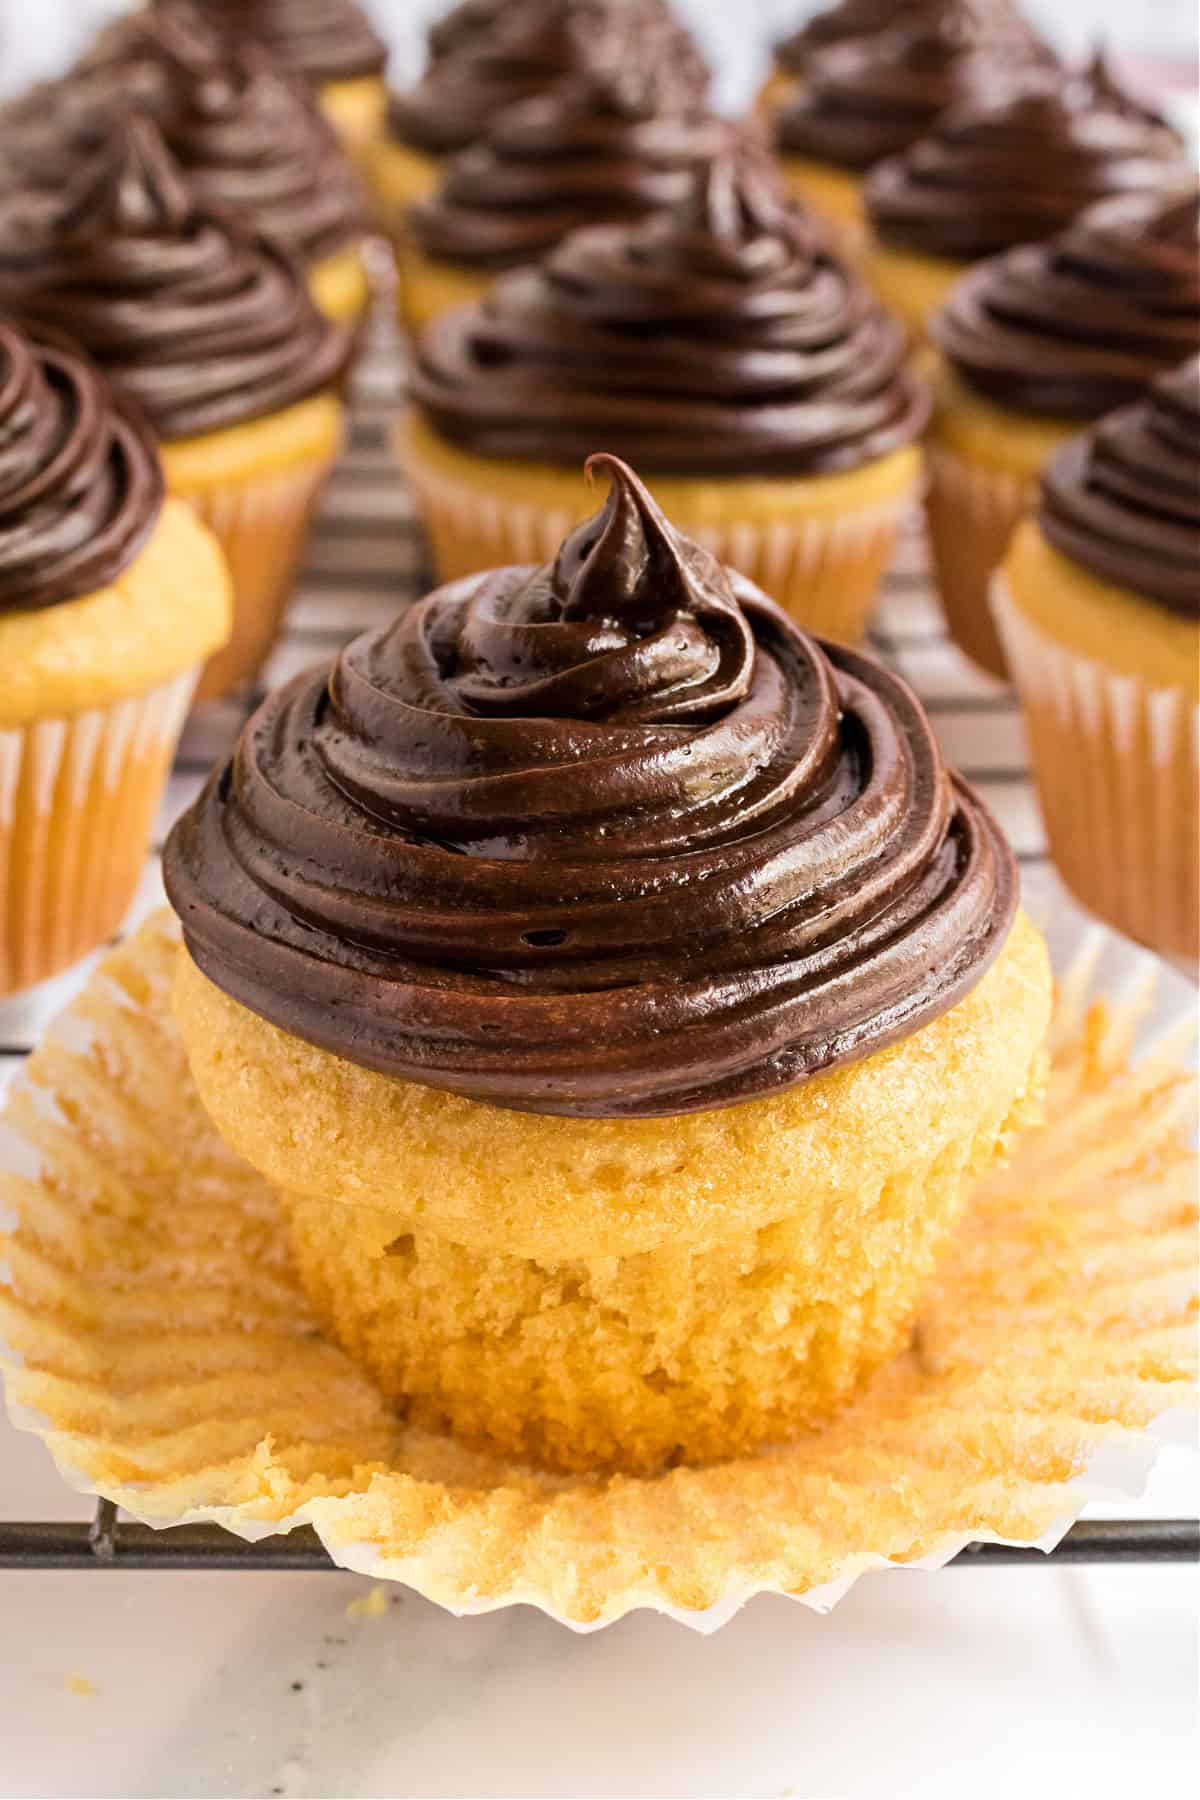 Yellow cupcake with a swirl of chocolate frosting.